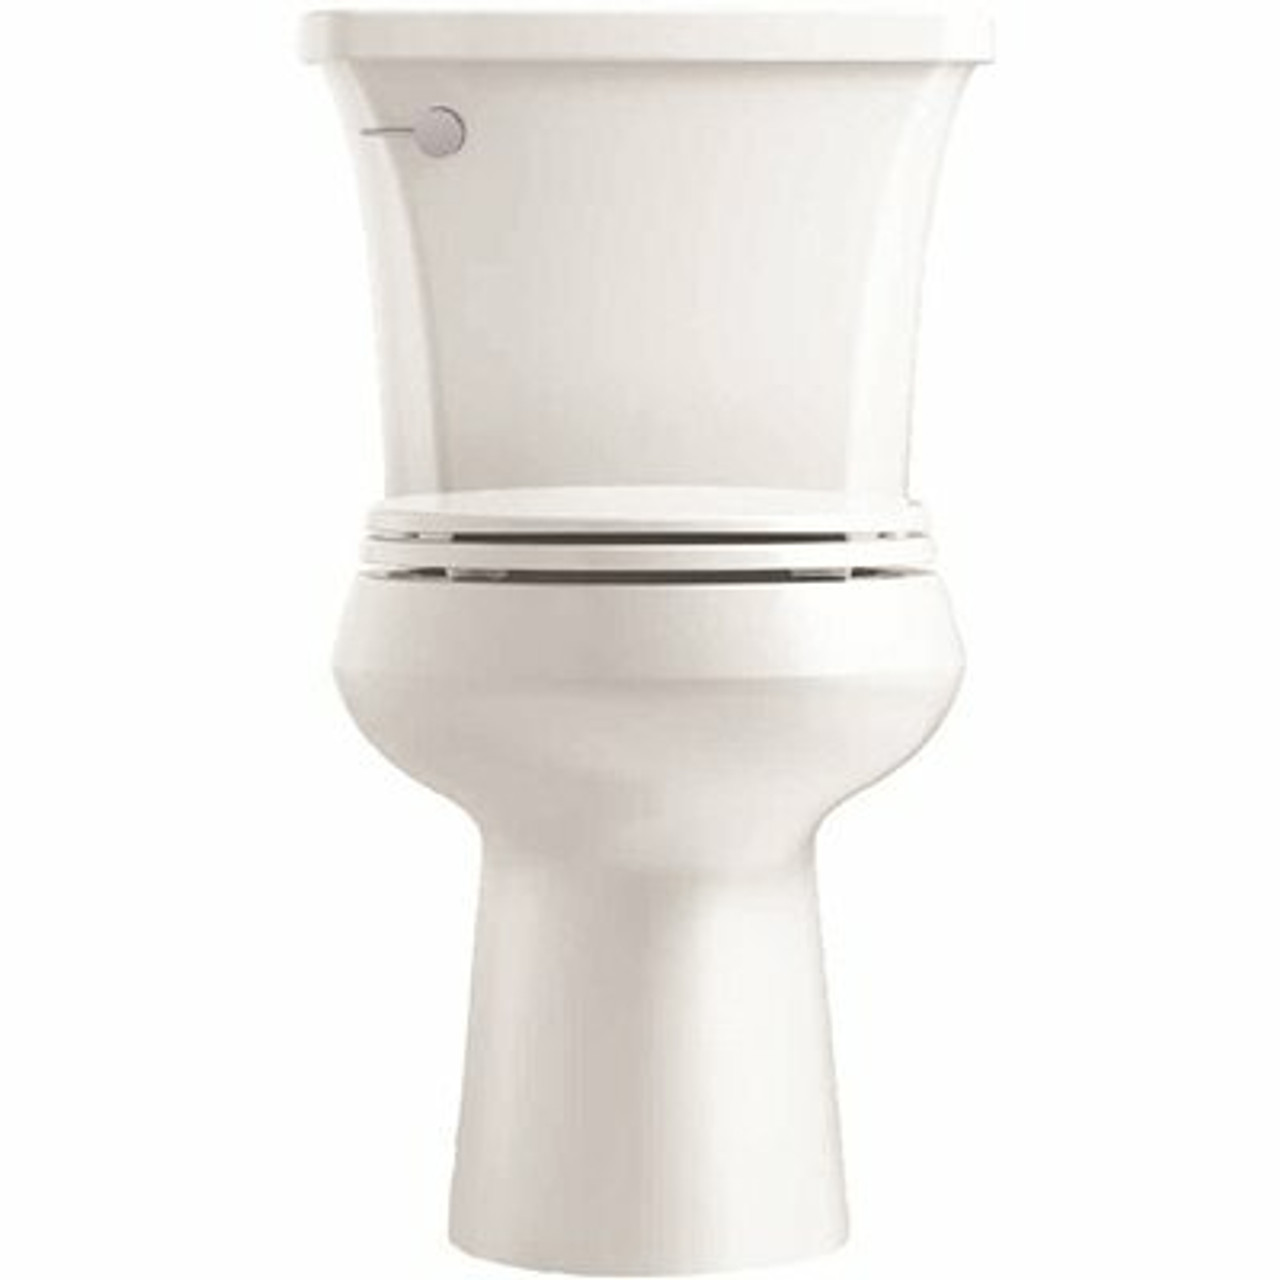 Highline Arc The Complete Solution 2-Piece 1.28 Gpf Single Flush Round-Front Toilet In White (Slow-Close Seat Included)